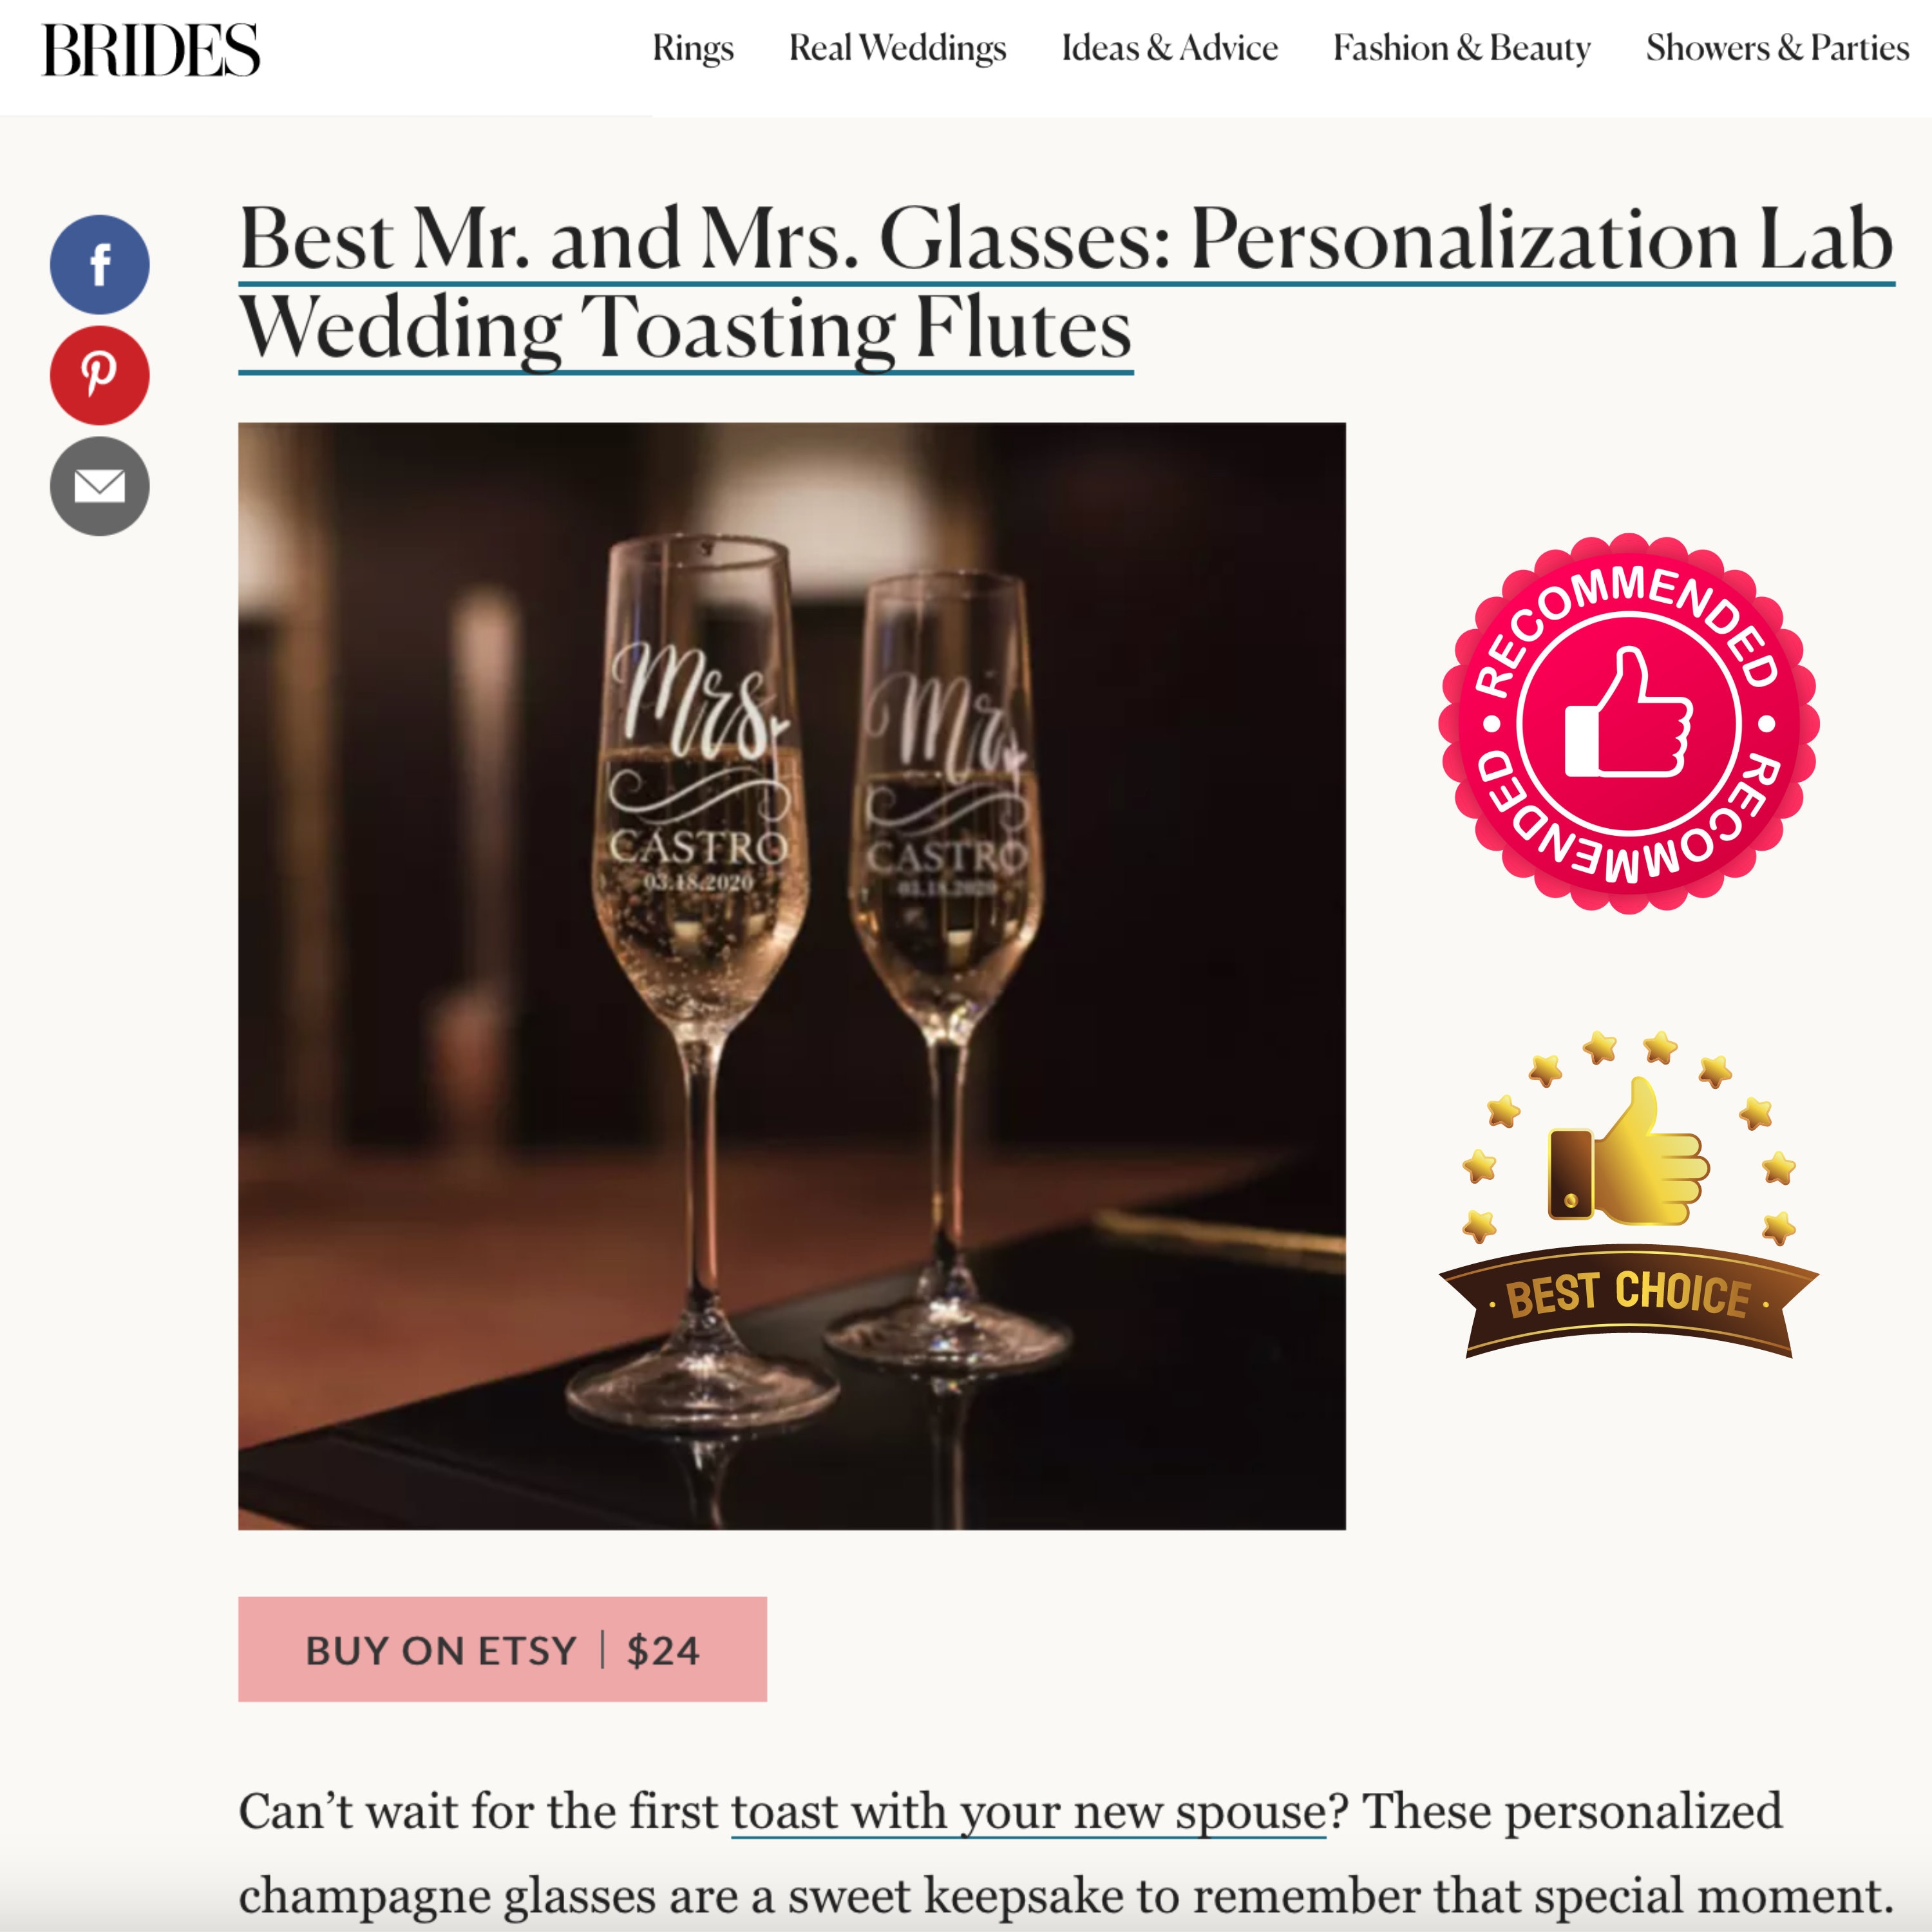 P Lab Set of 2 Wedding Toasting Glasses Personalized Wedding Toast Champagne Flute Set Bride Groom Names & Date Hearts Etched Flutes for Bride & Groom Customized Wedding Gift #N9 